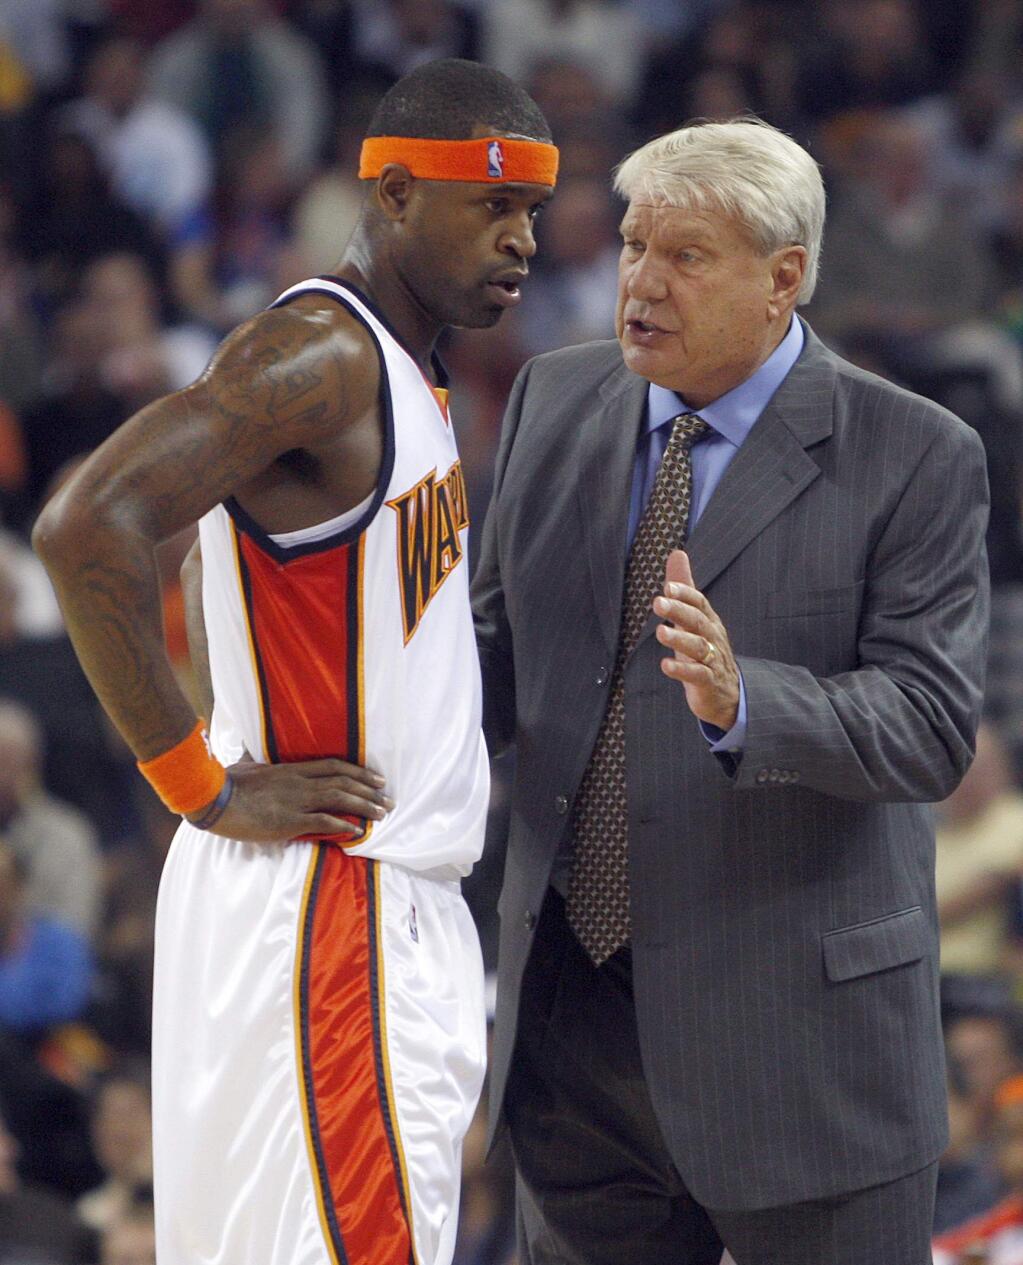 Then-Golden State Warriors coach Don Nelson, right, speaks with Stephen Jackson during the first half against the Houston Rockets Wednesday, Oct. 28, 2009, in Oakland. (AP Photo/Ben Margot)